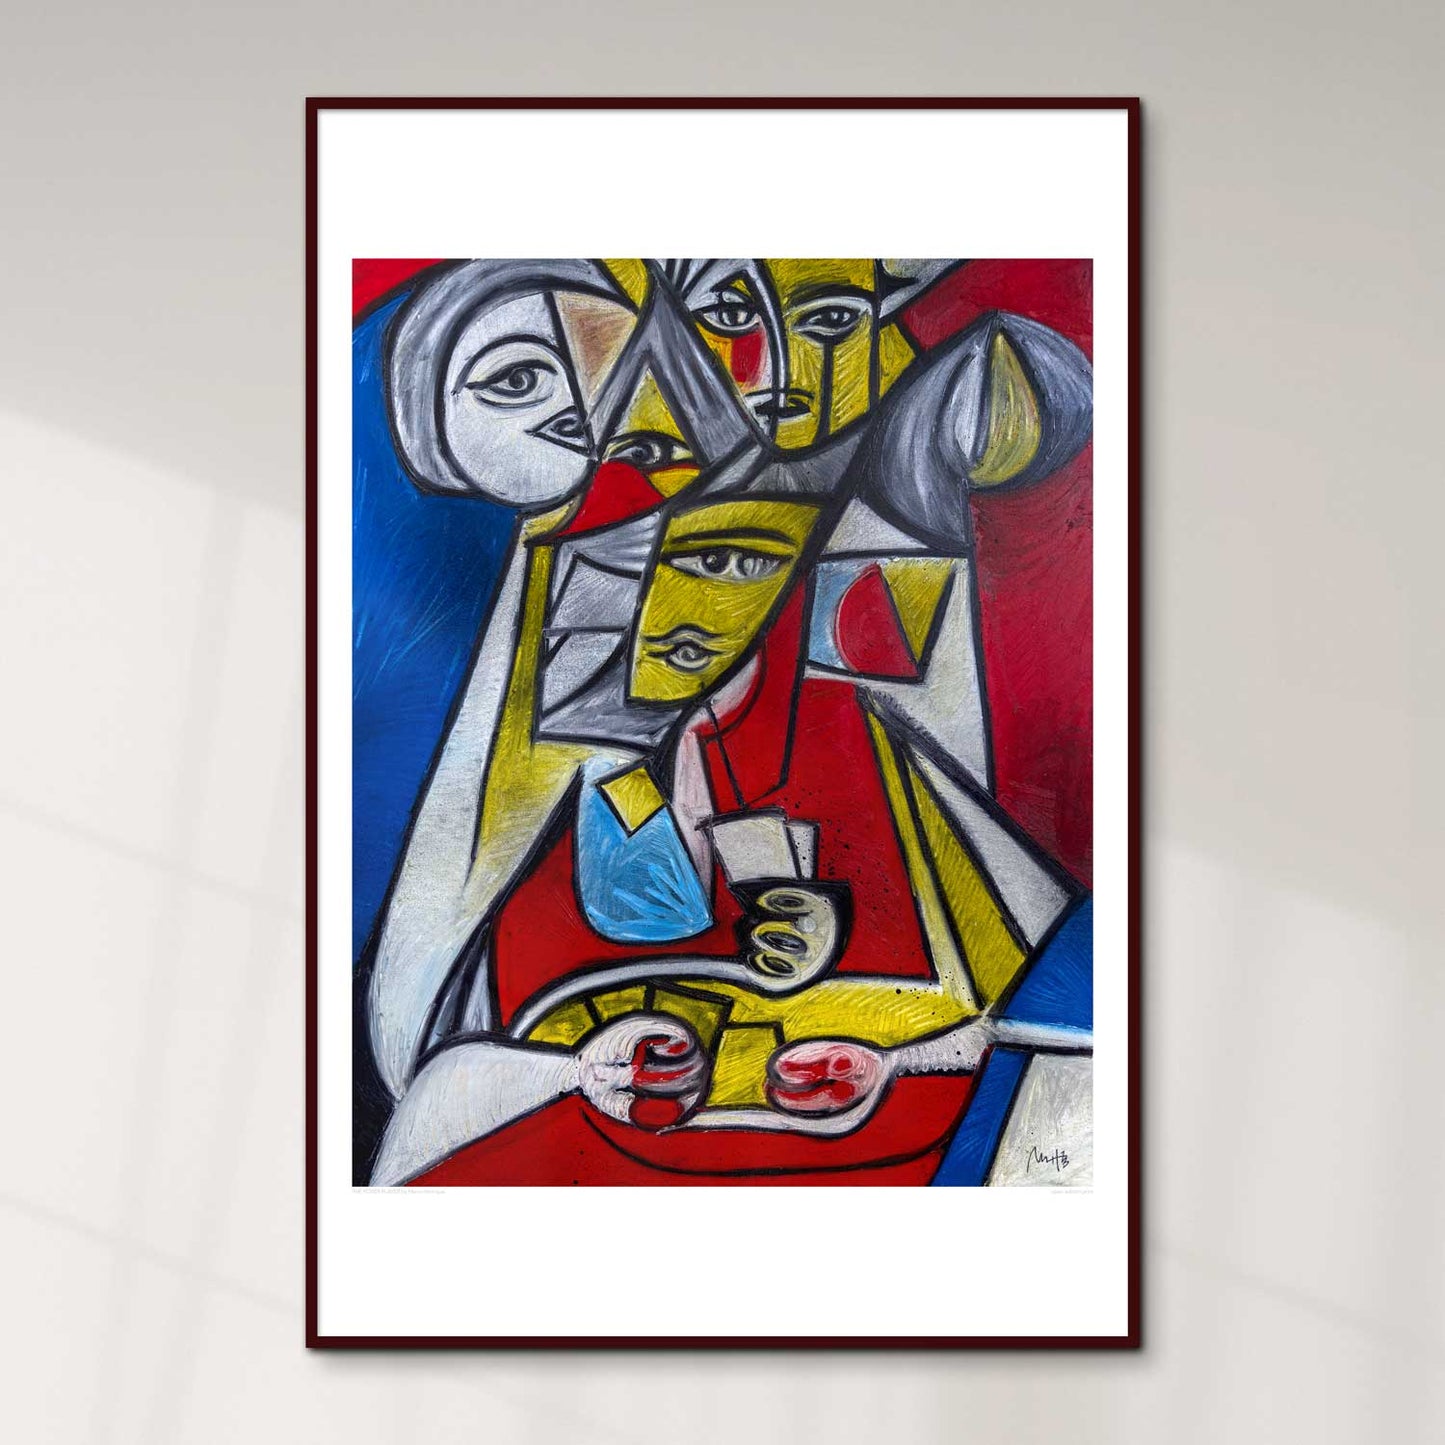 The Poker Player, Open Edition Print